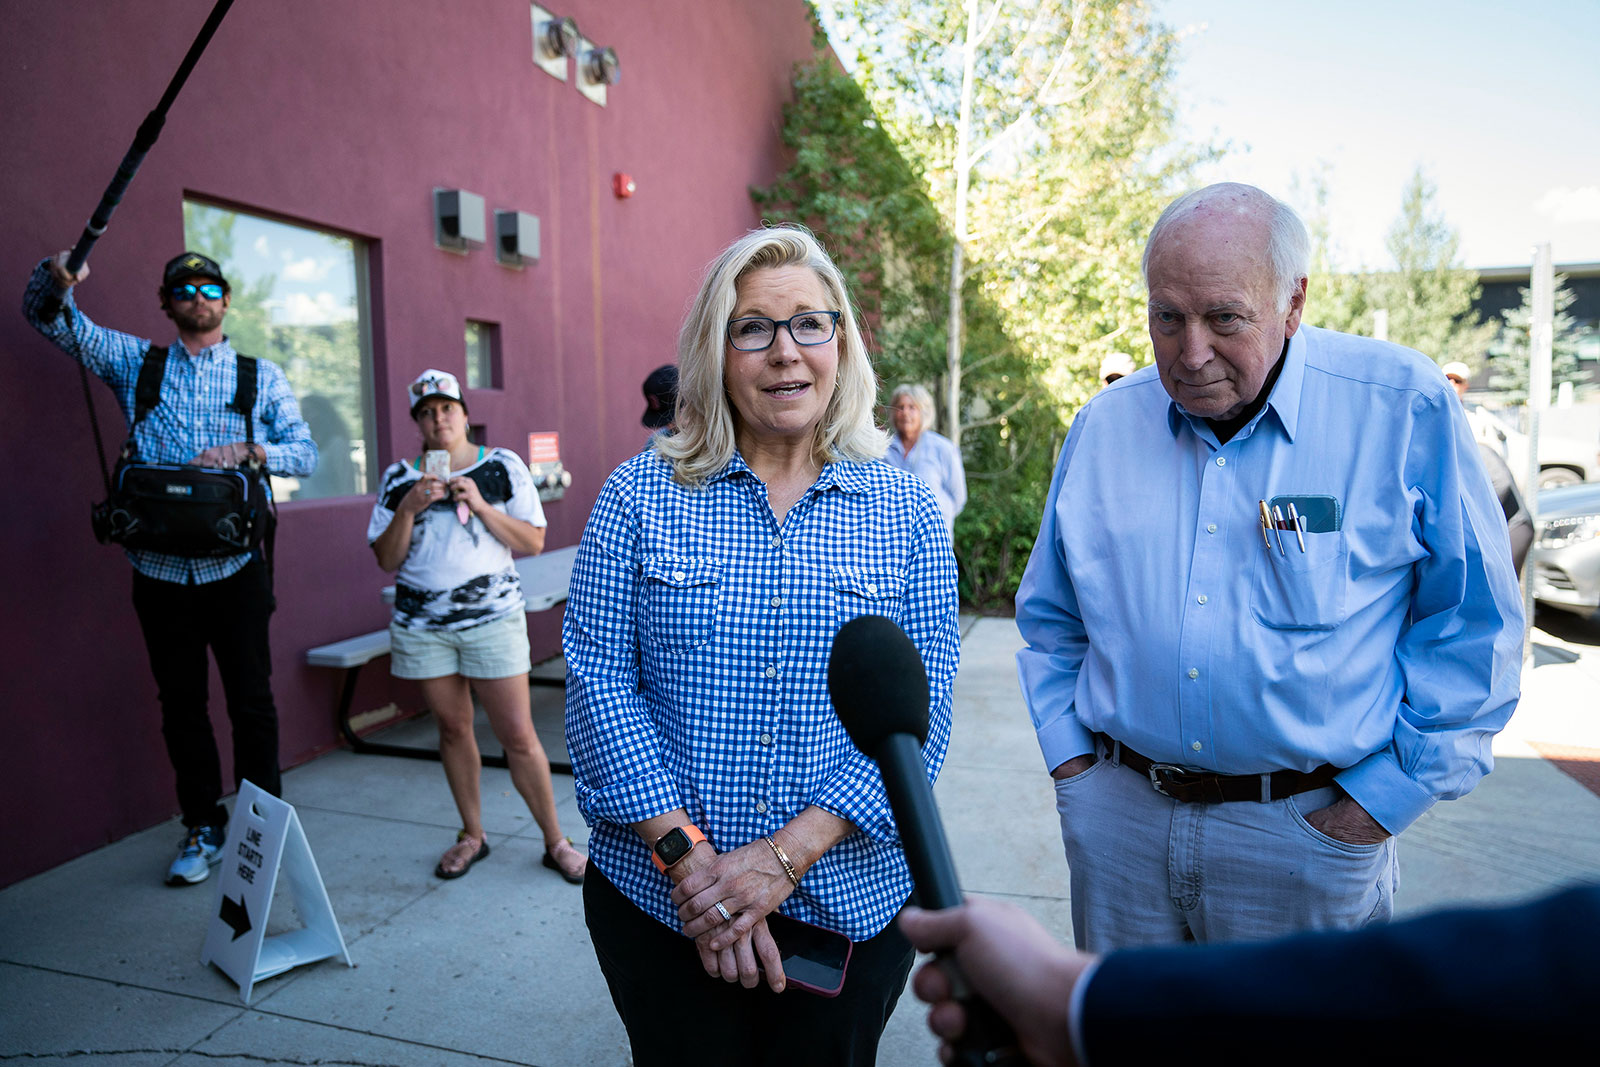 Rep. Liz Cheney arrives with her father, former Vice President Dick Cheney, to vote at the Teton County Library on Tuesday, August 16. 